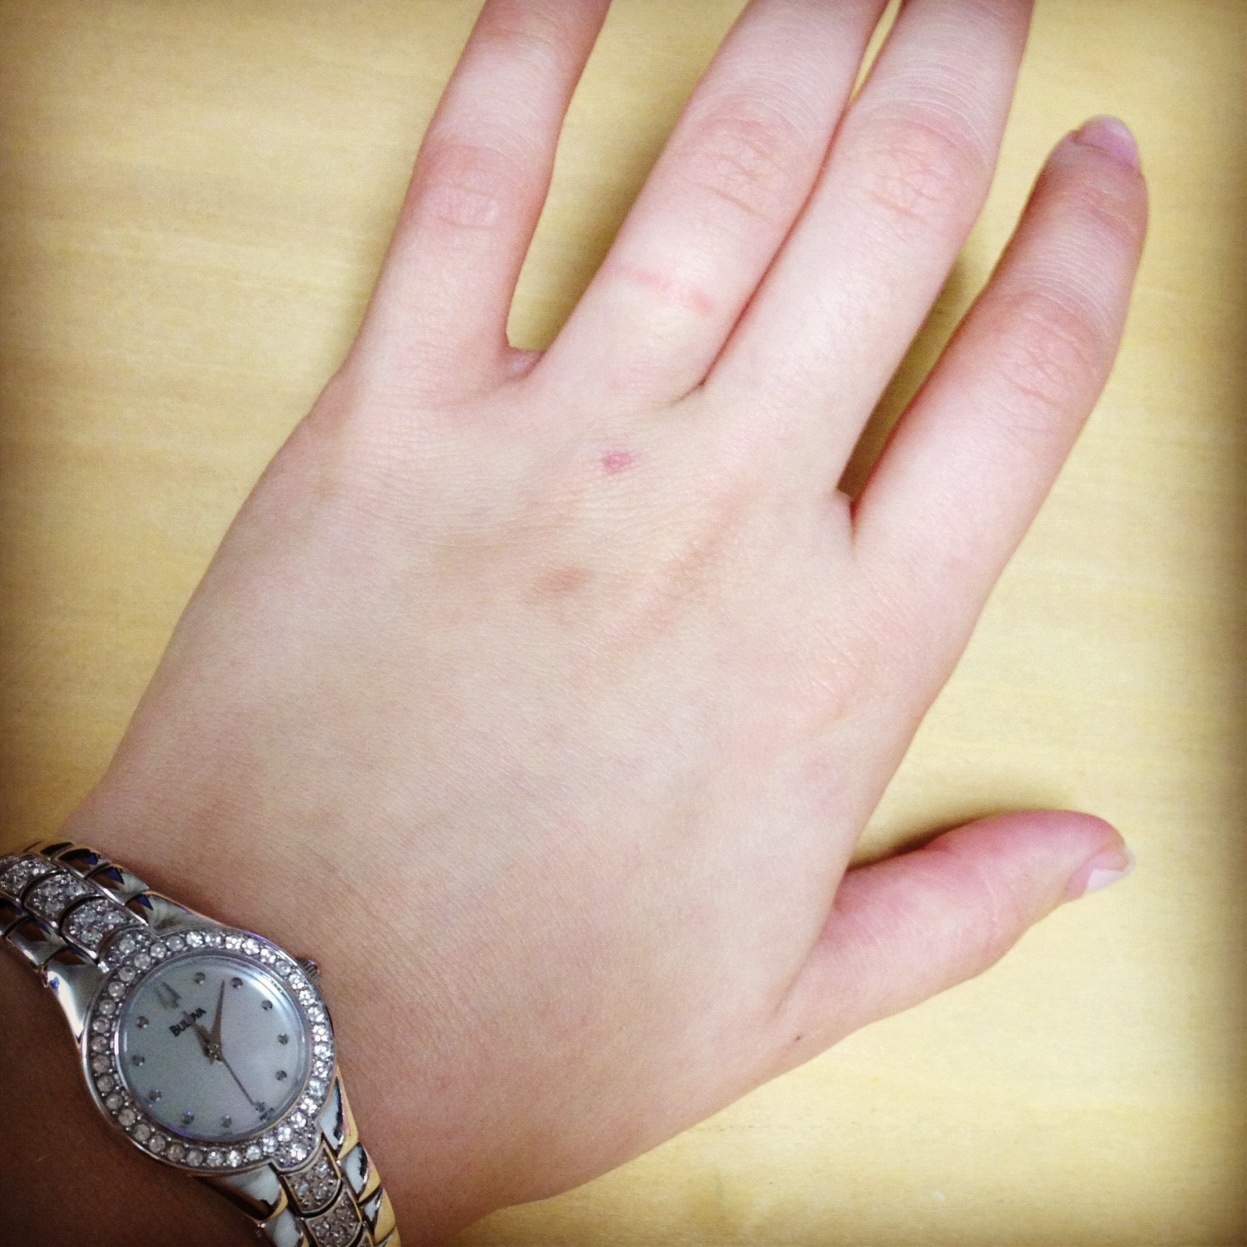 Disclaimer: look at the scars on my hand.. barista battle wounds!